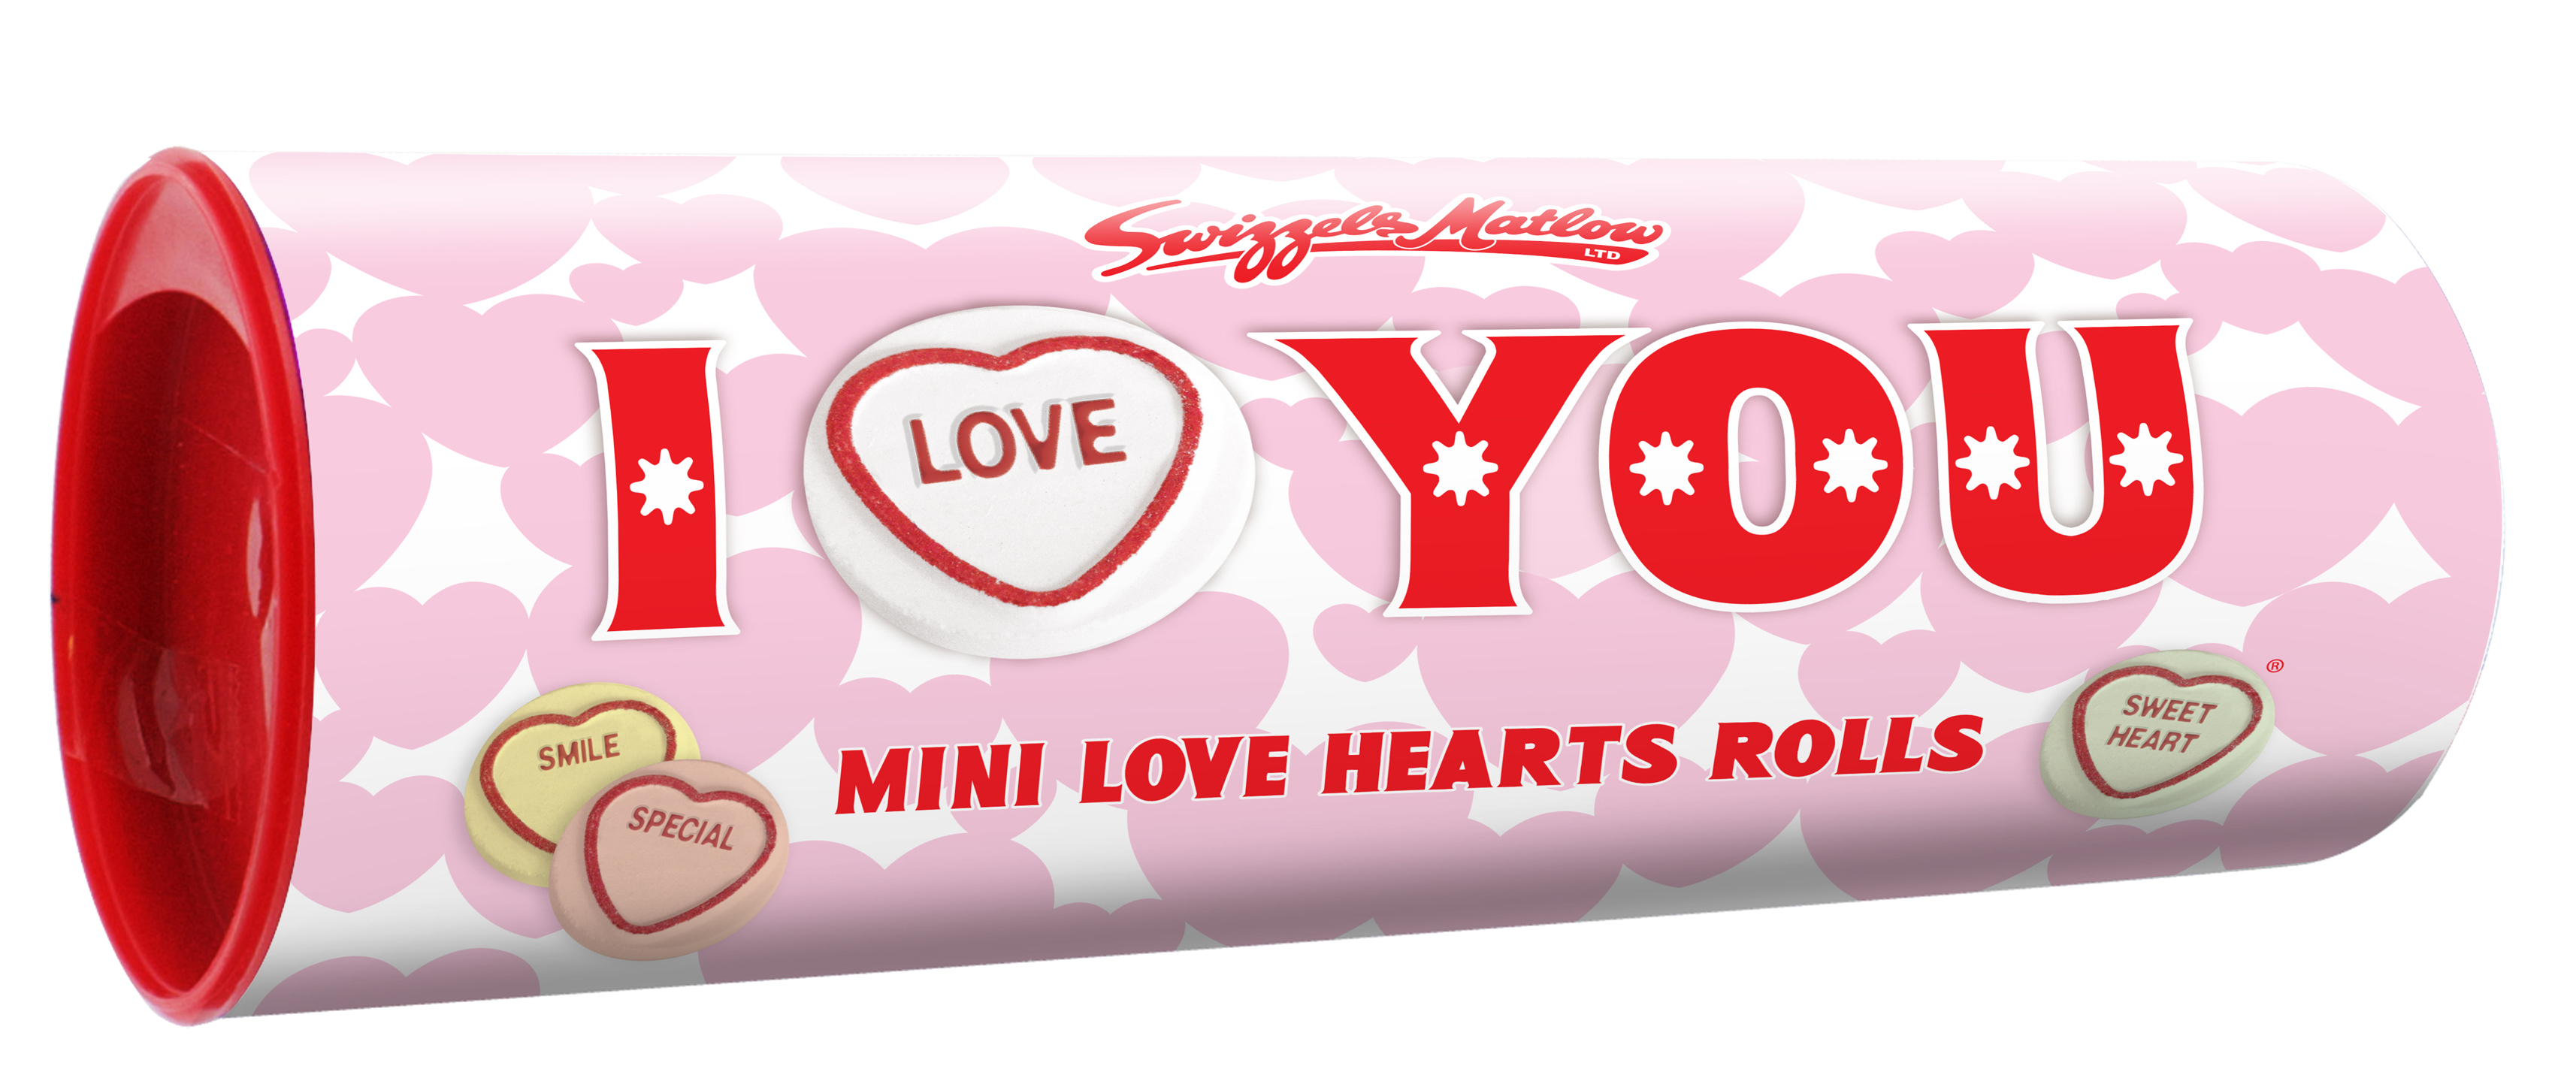 Do you remember Love Hearts? - A Luxury Lifestyle Blog - Pregnant ...